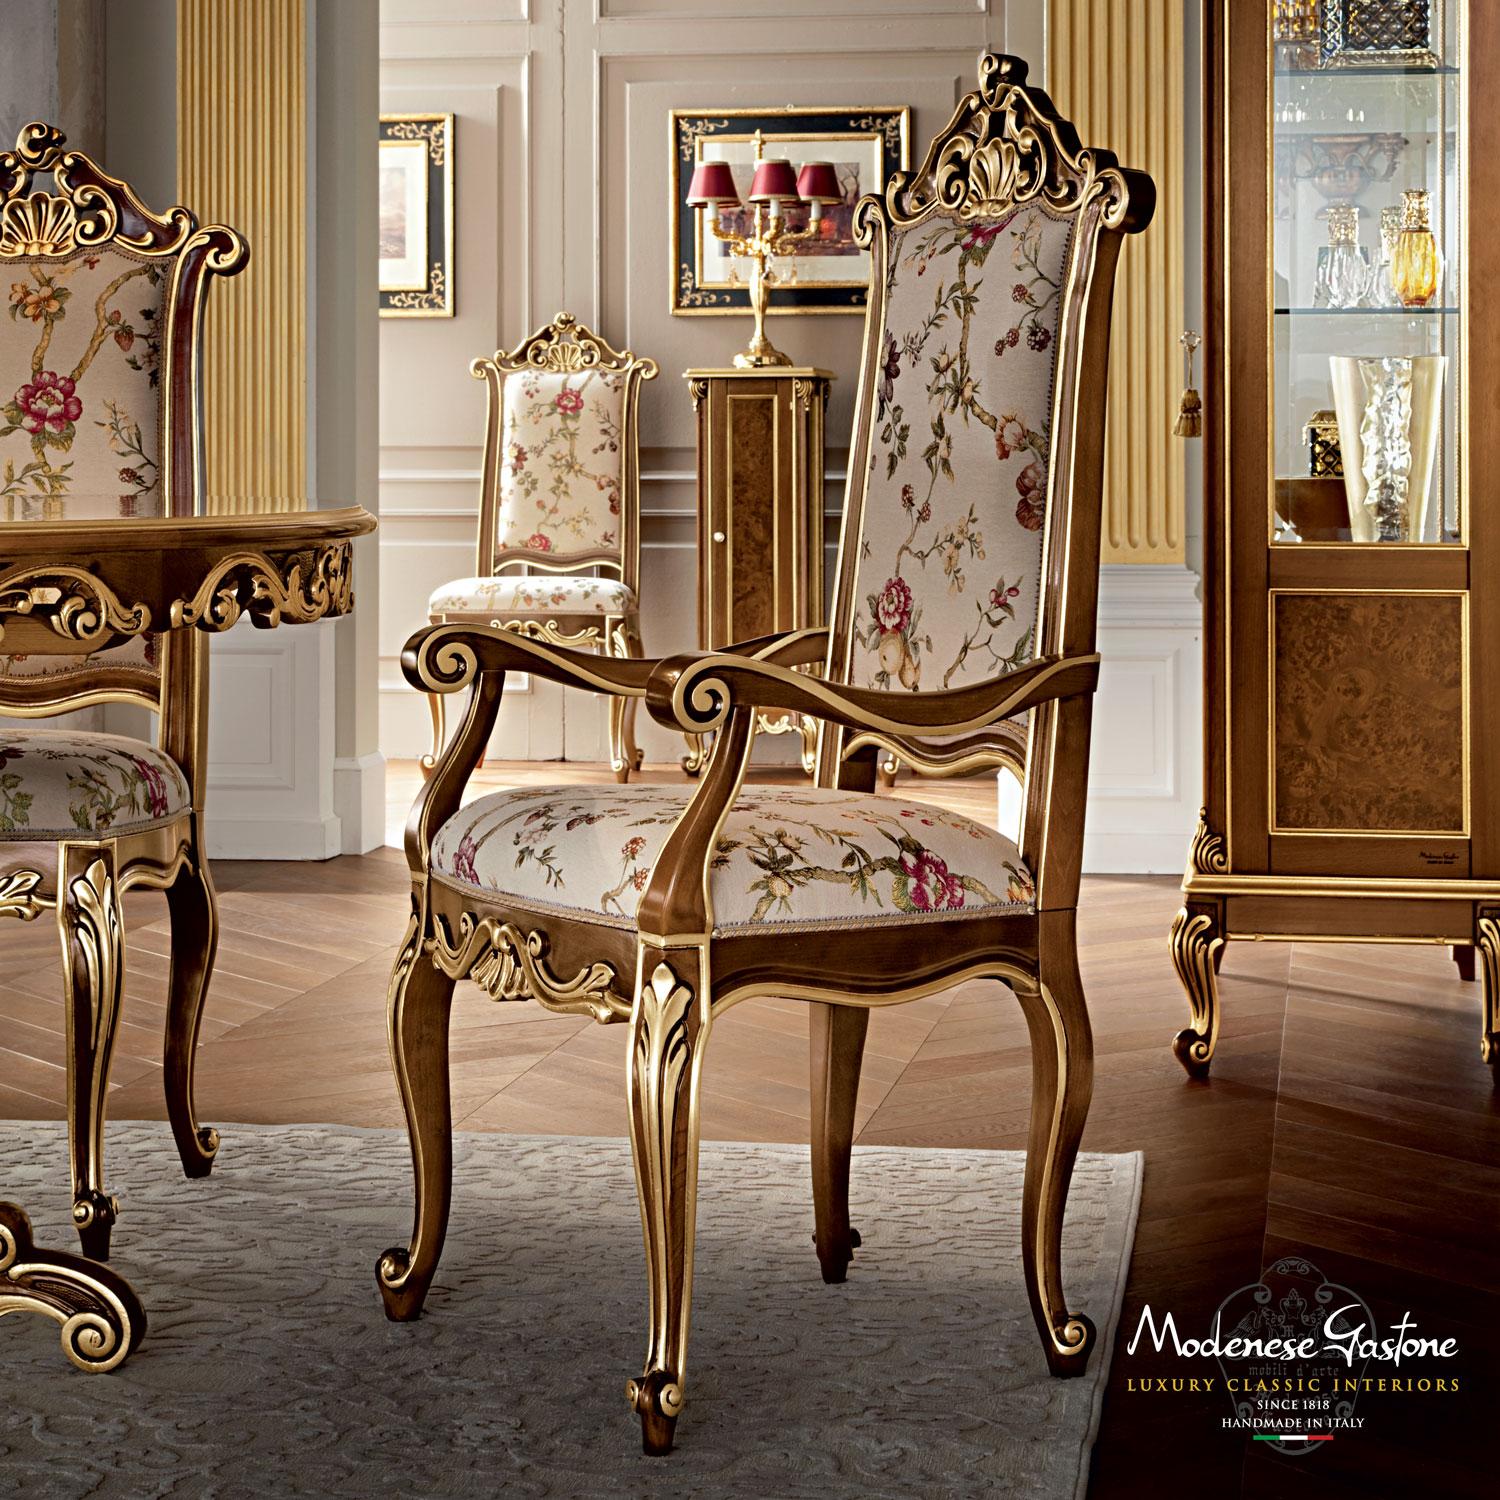 High-end palaces need high-end furniture, and the mission of Modenese Gastone Interiors is to serve this purpose. This majestic shiny dining chair presents a dark wlanut finish with gold leaf applications along the carved lines, while the seating